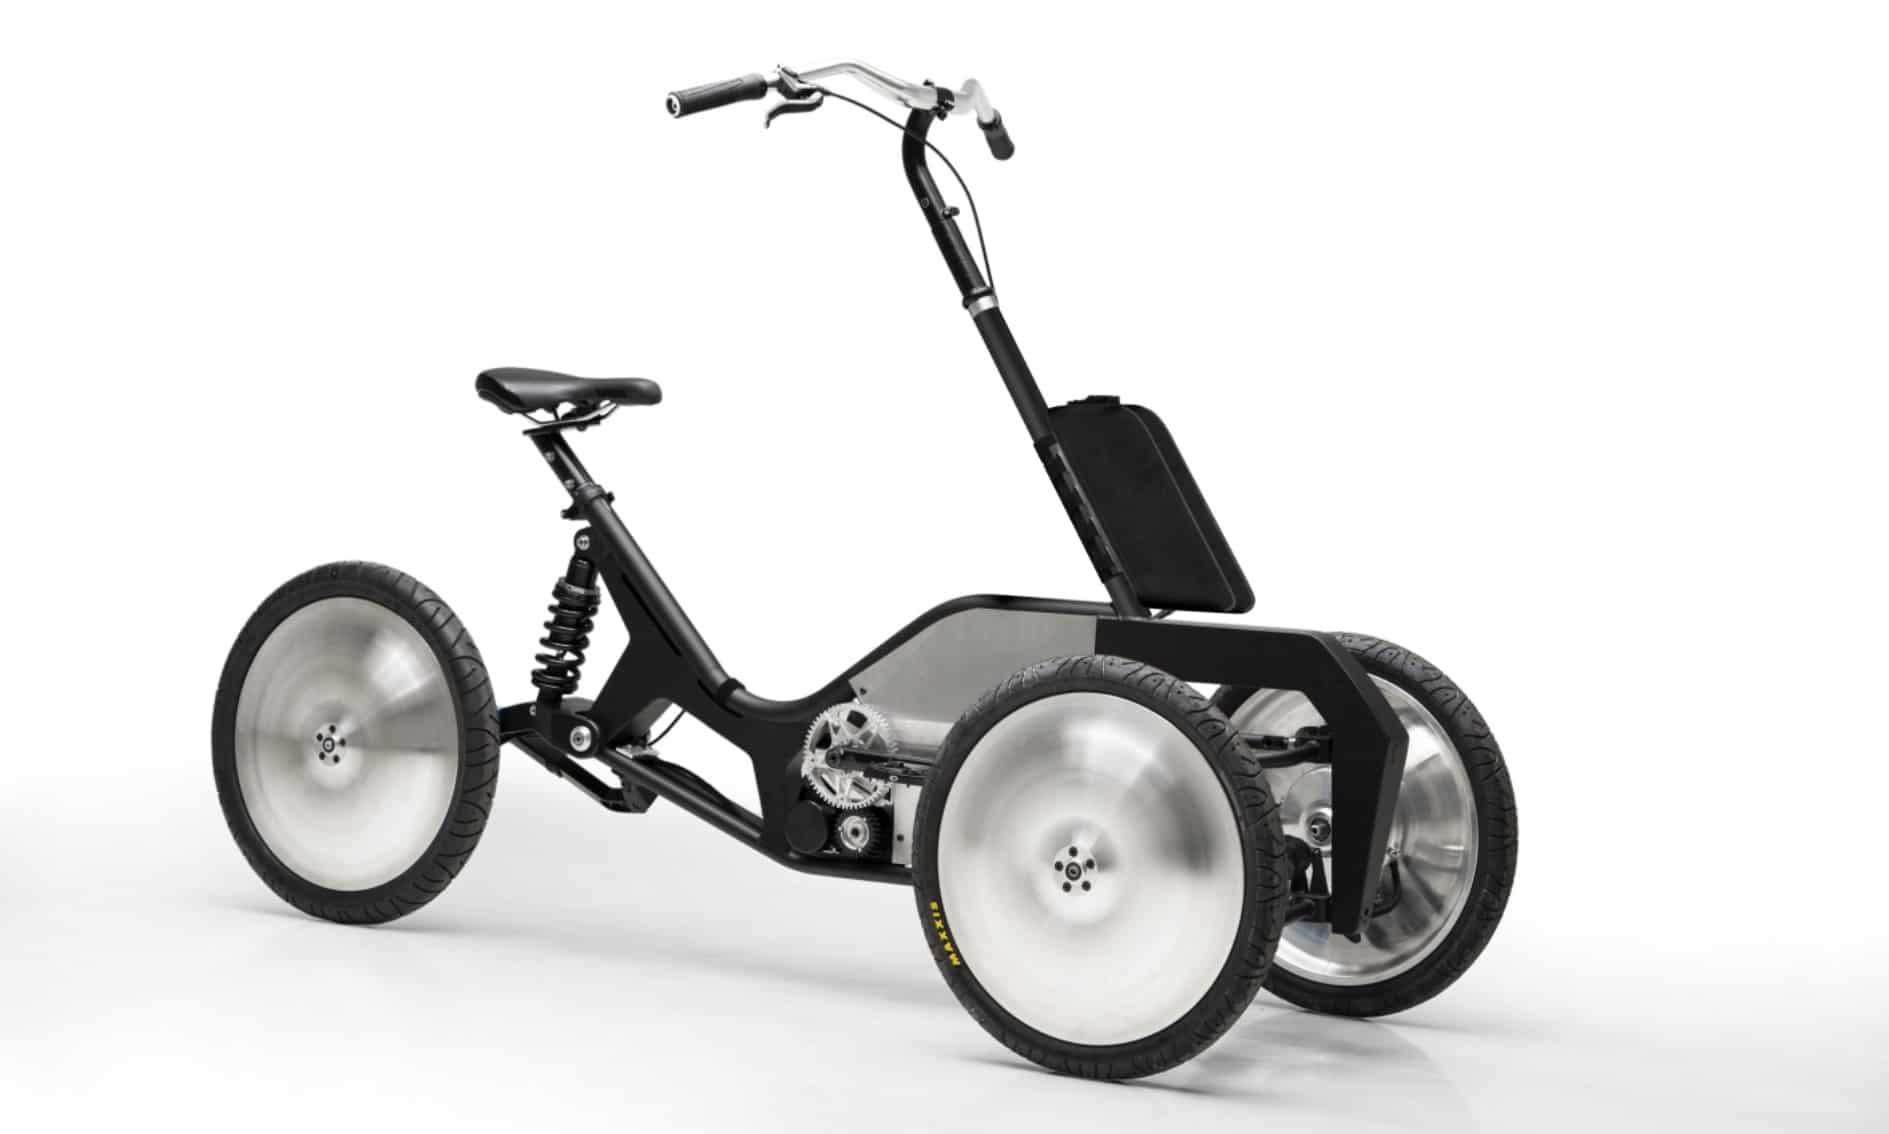 On the Arcimoto MLM tricycle you will feel like in the sharpest turn on a motorcycle